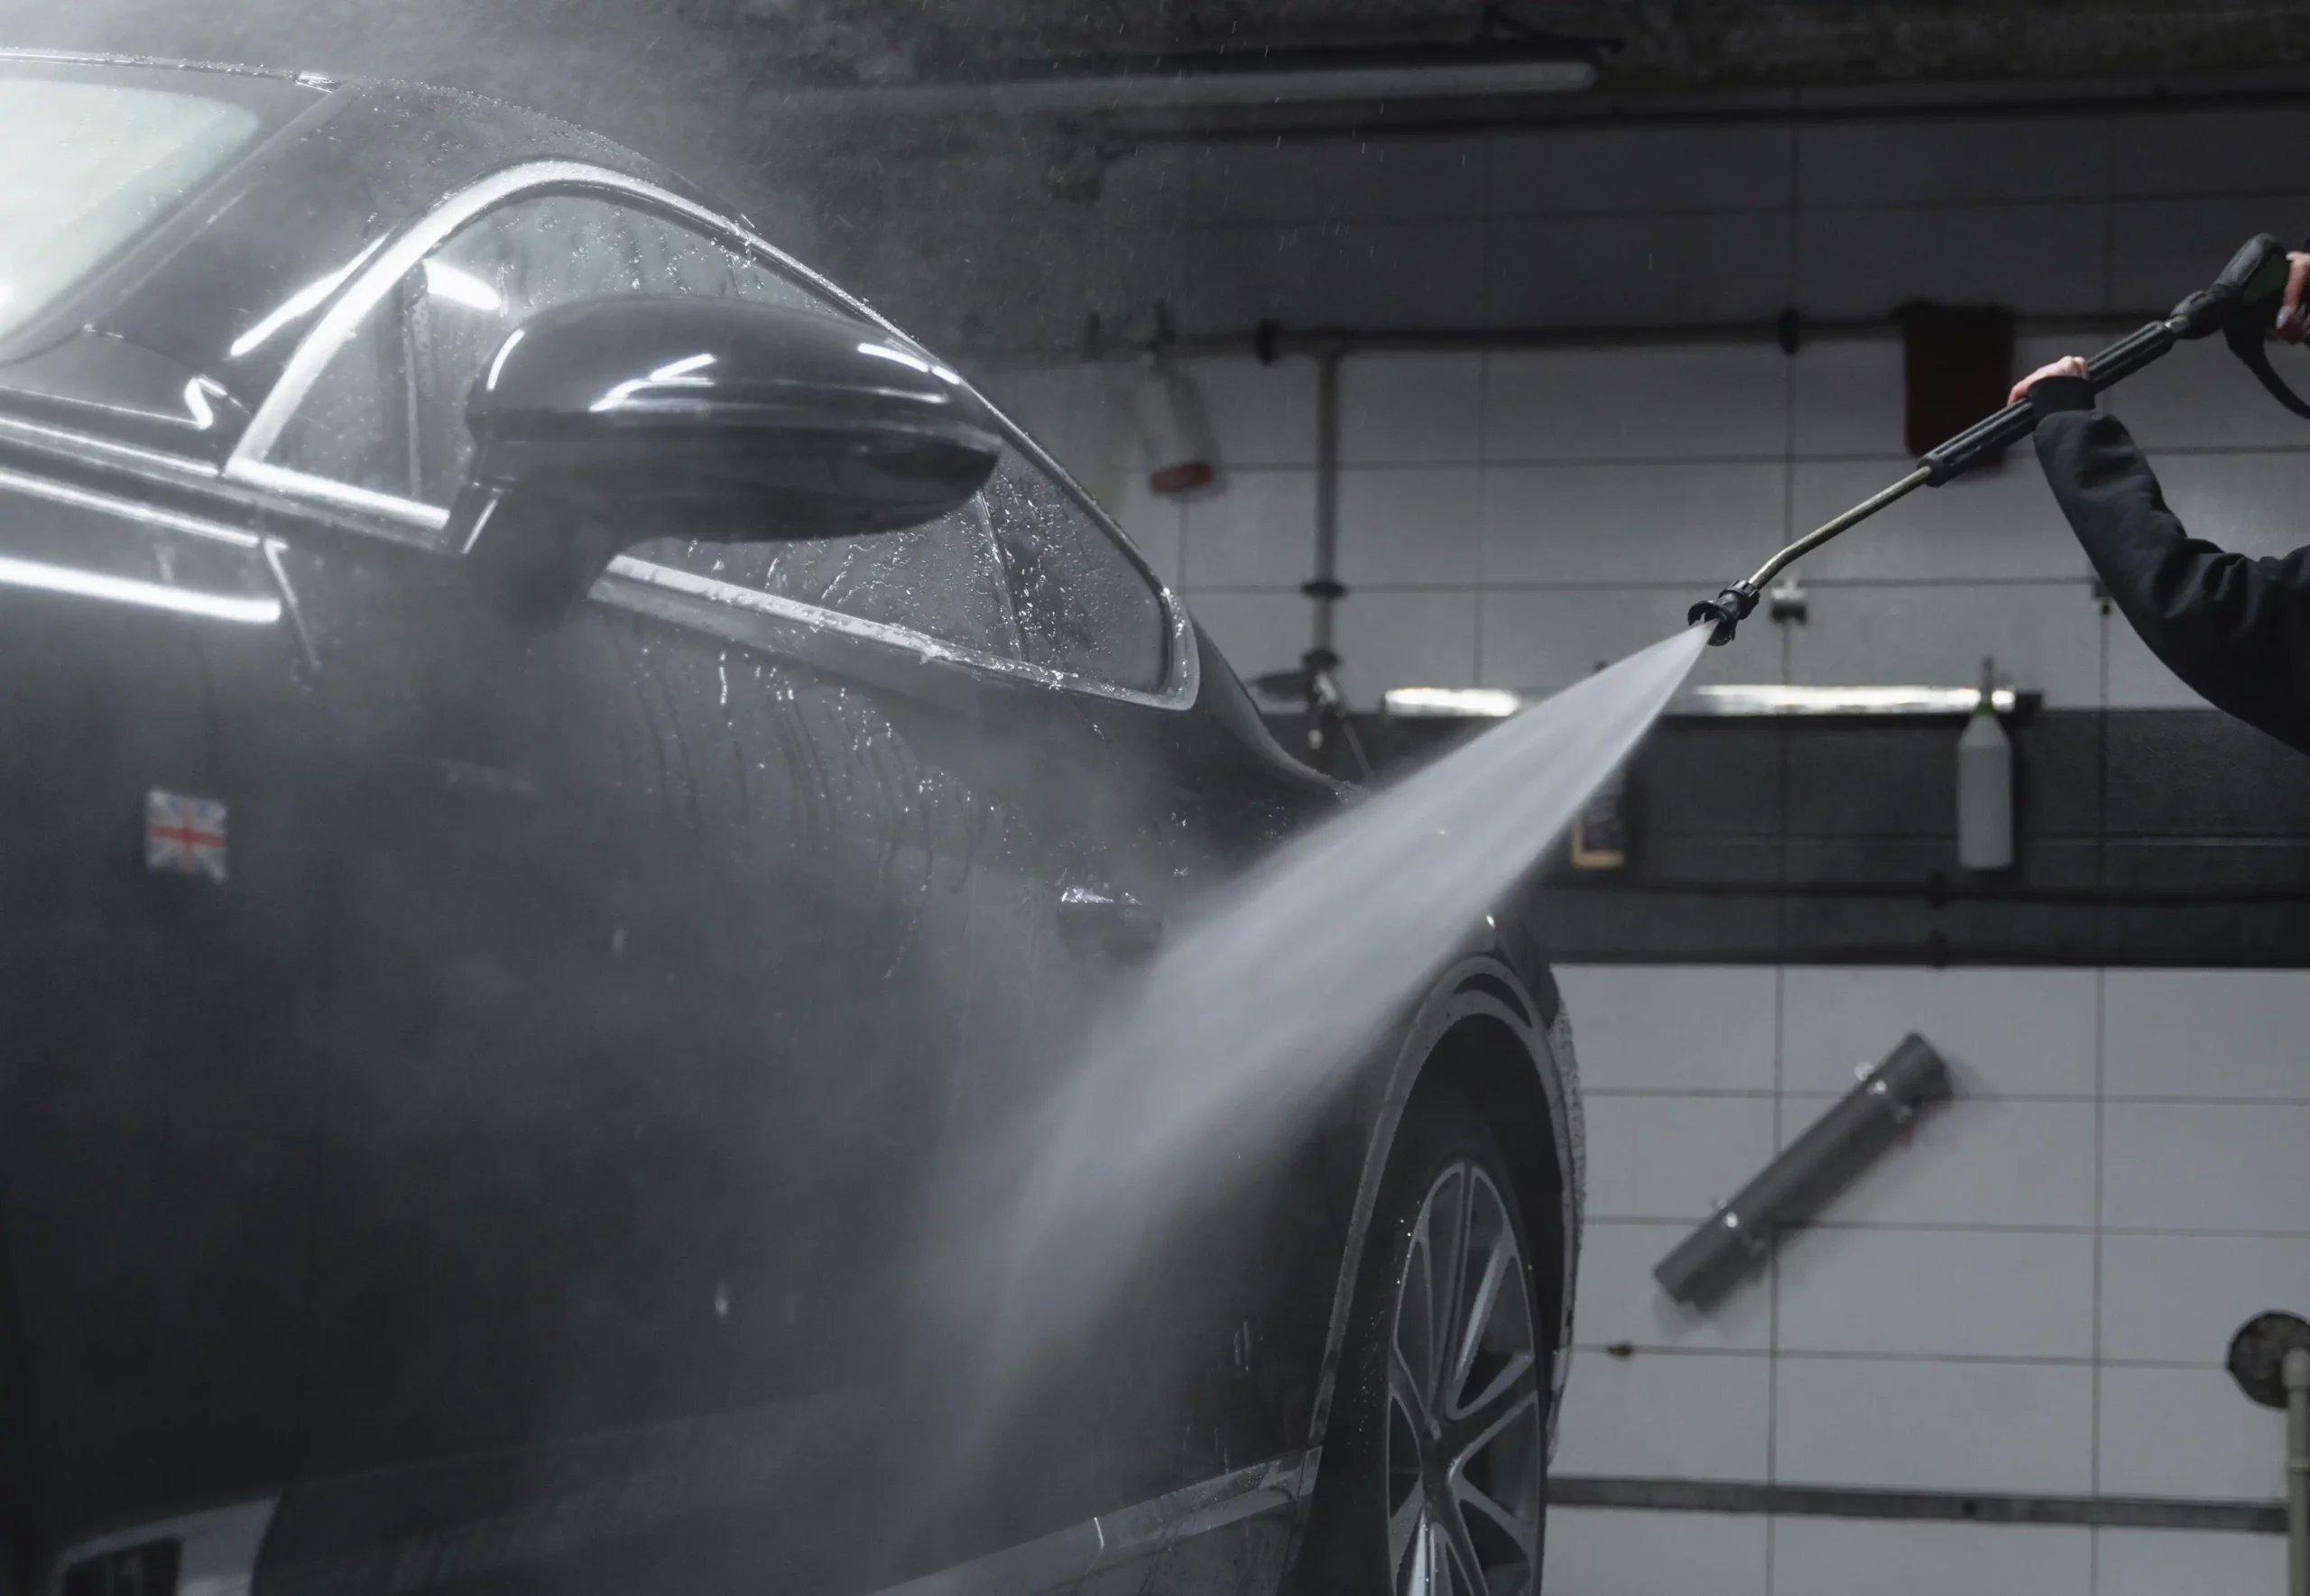 Technician using a high pressure washer to wash car in workshop.